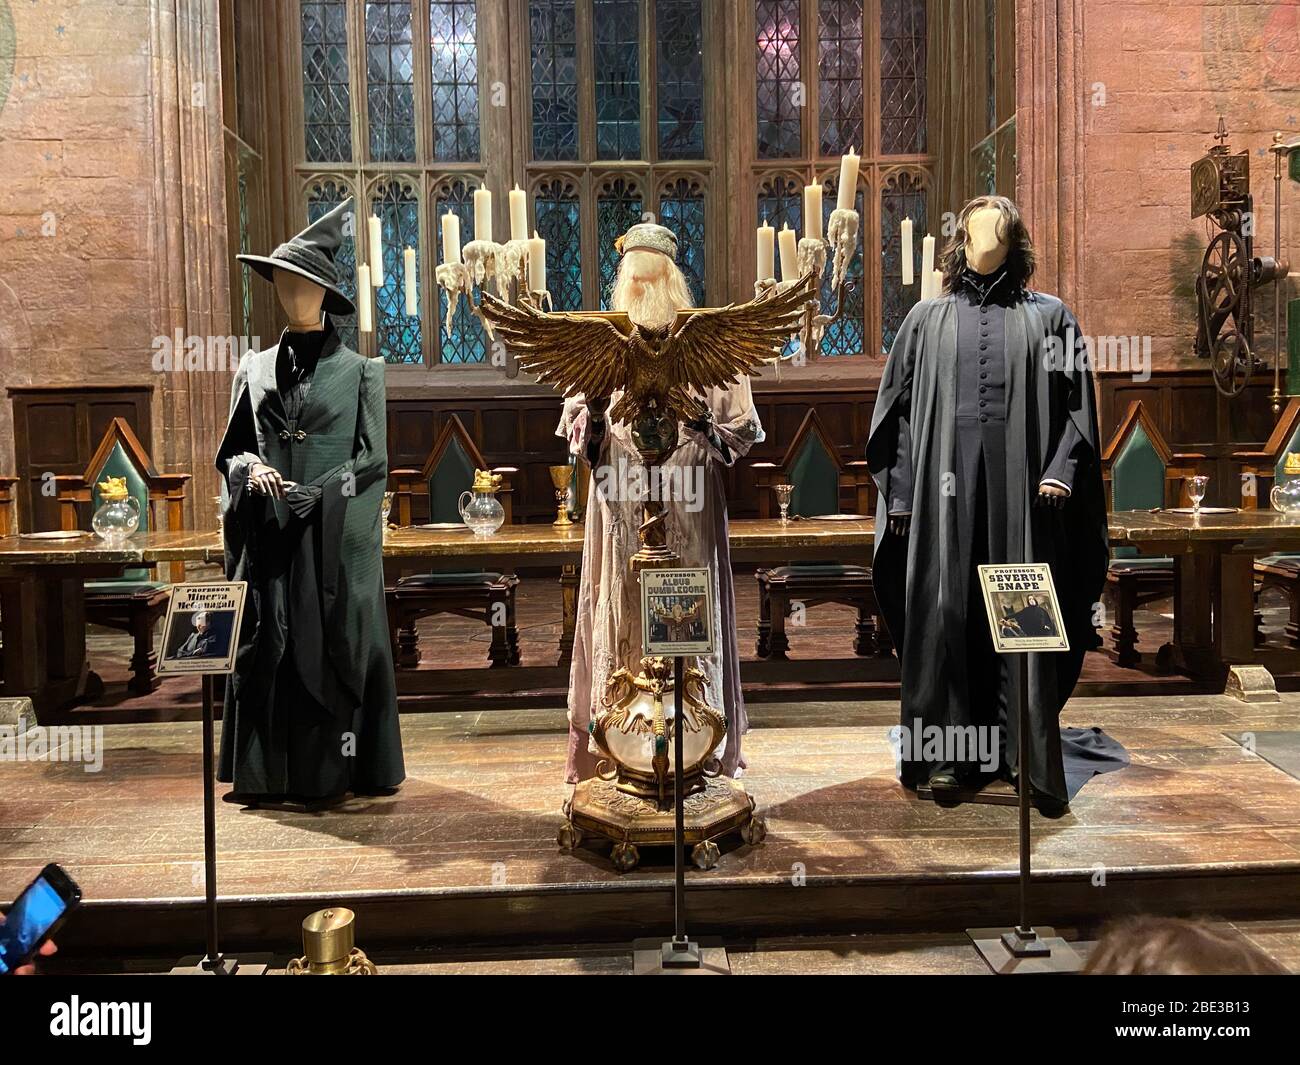 The Great Hall - Harry Potter WB Studio Tour Stock Photo